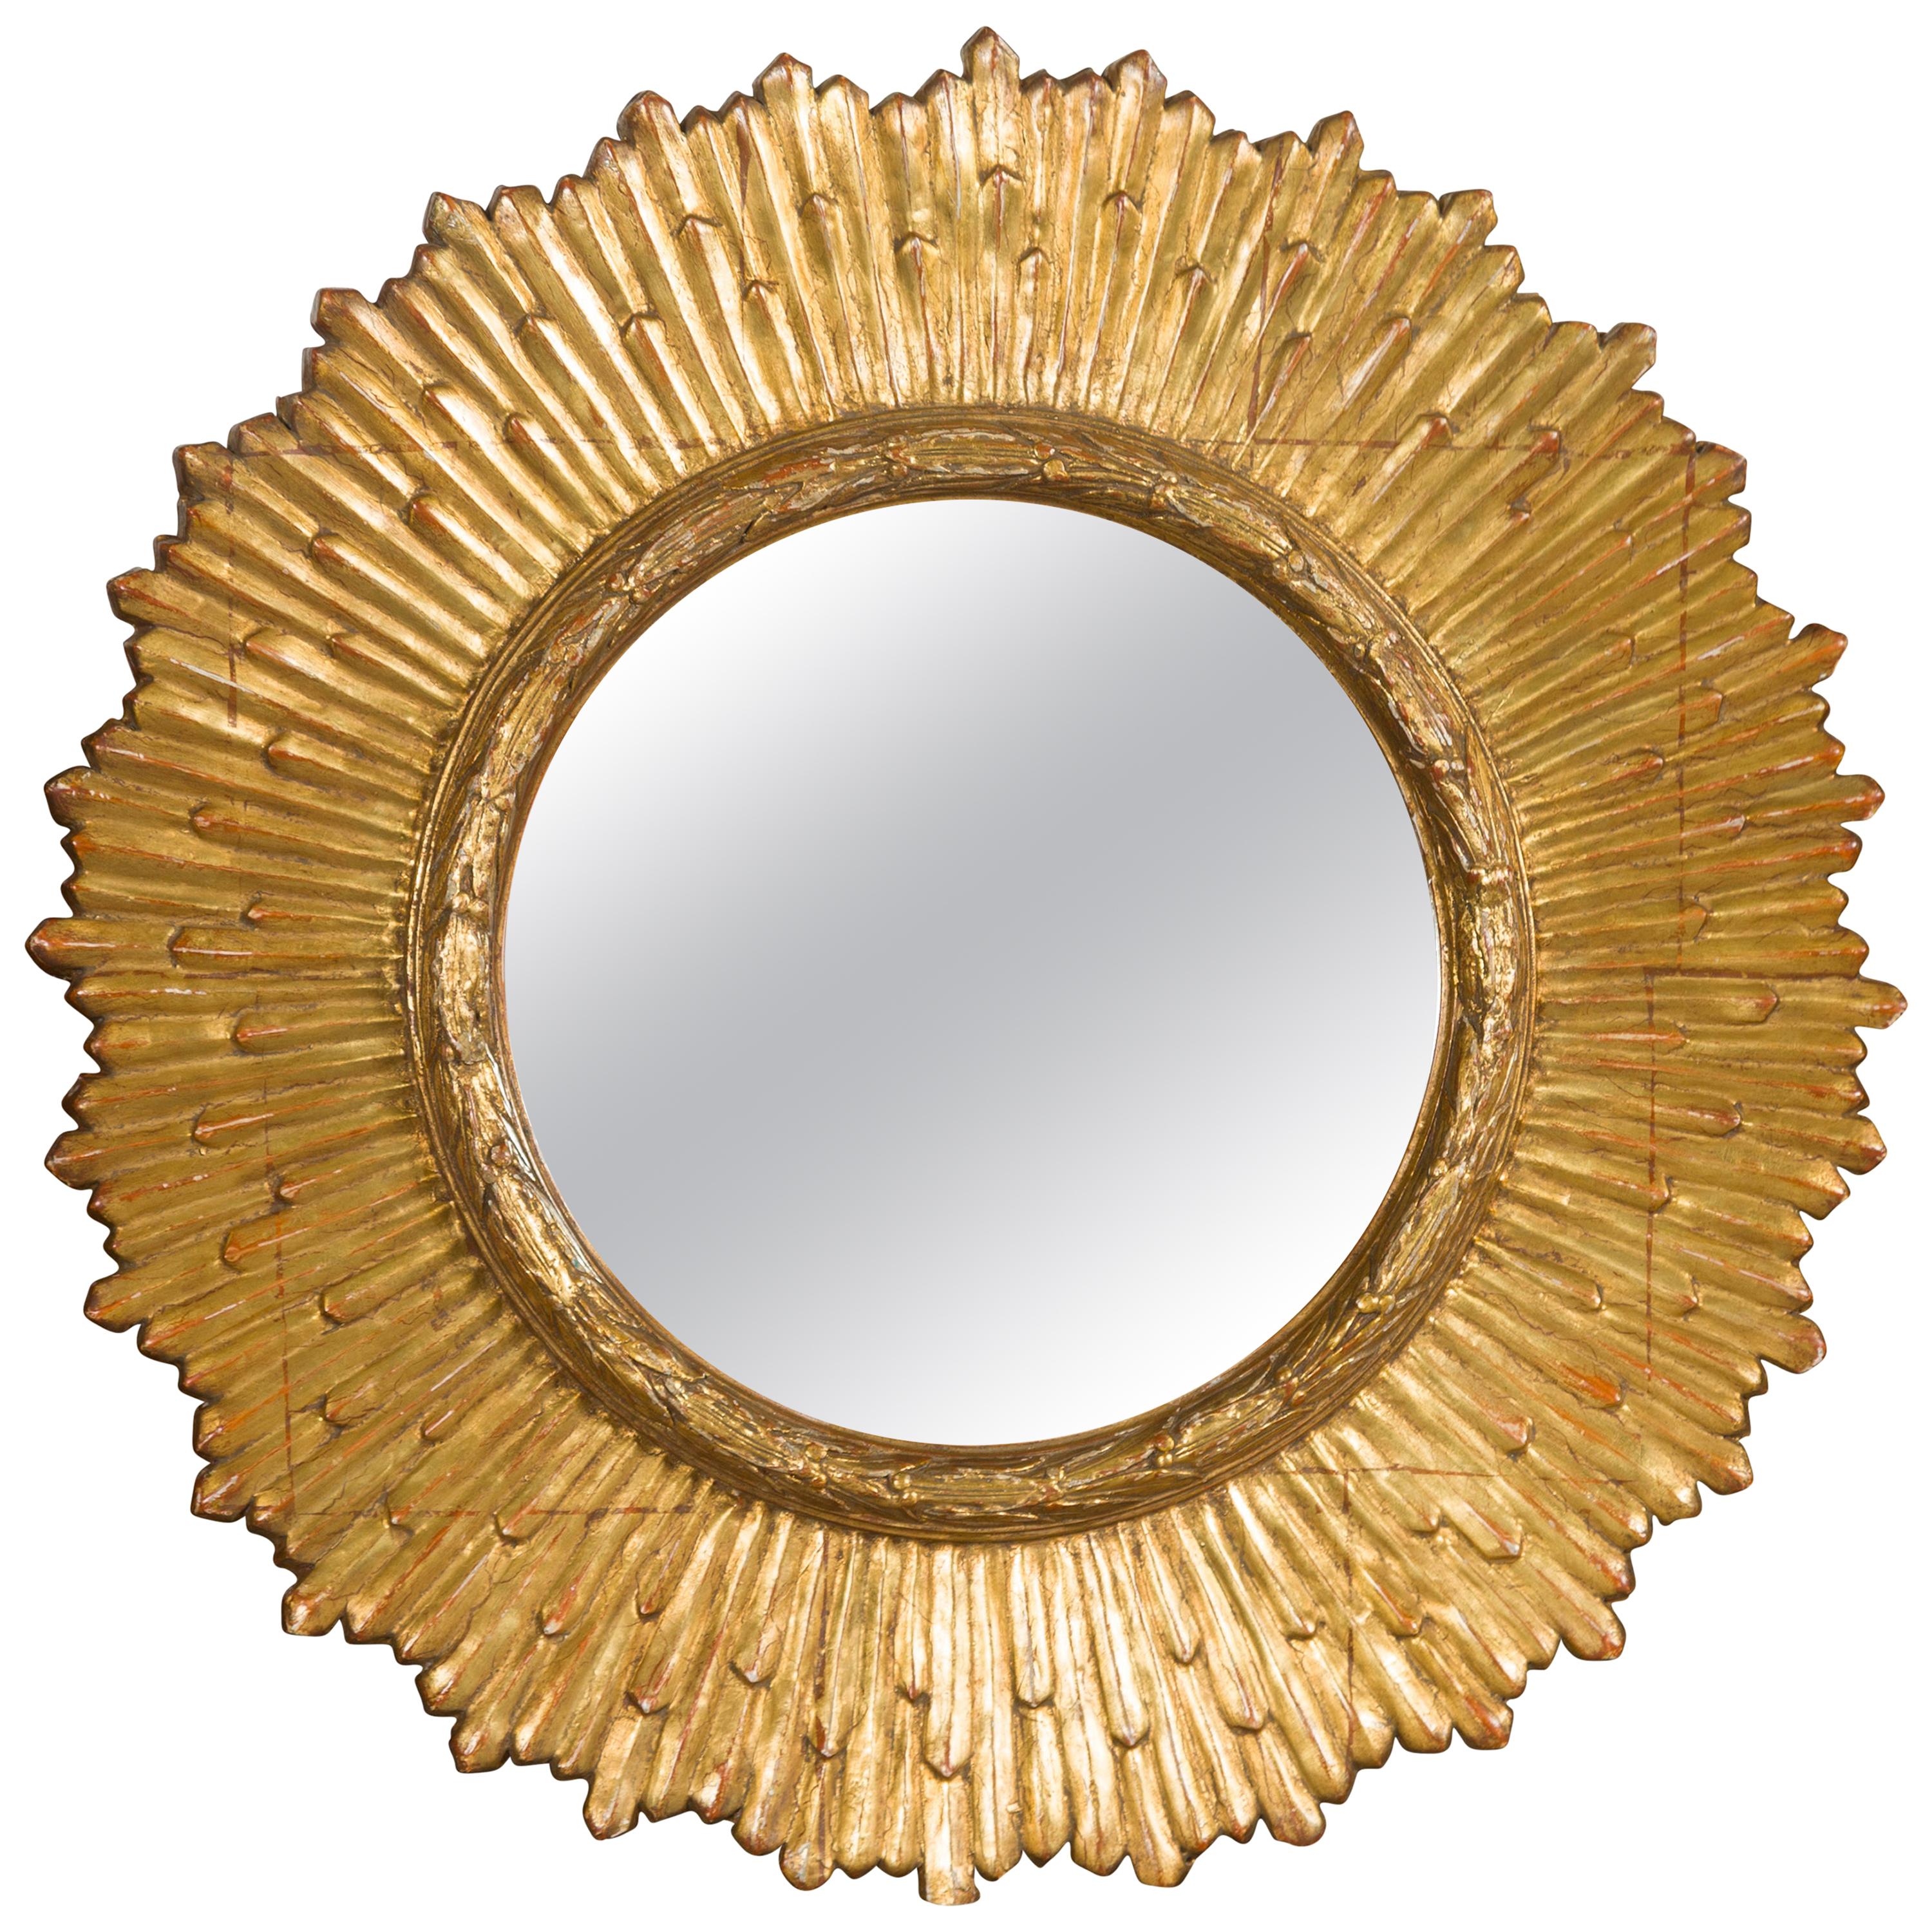 French Midcentury Giltwood Sunburst Mirror with Radiating Rays and Carved Frame For Sale